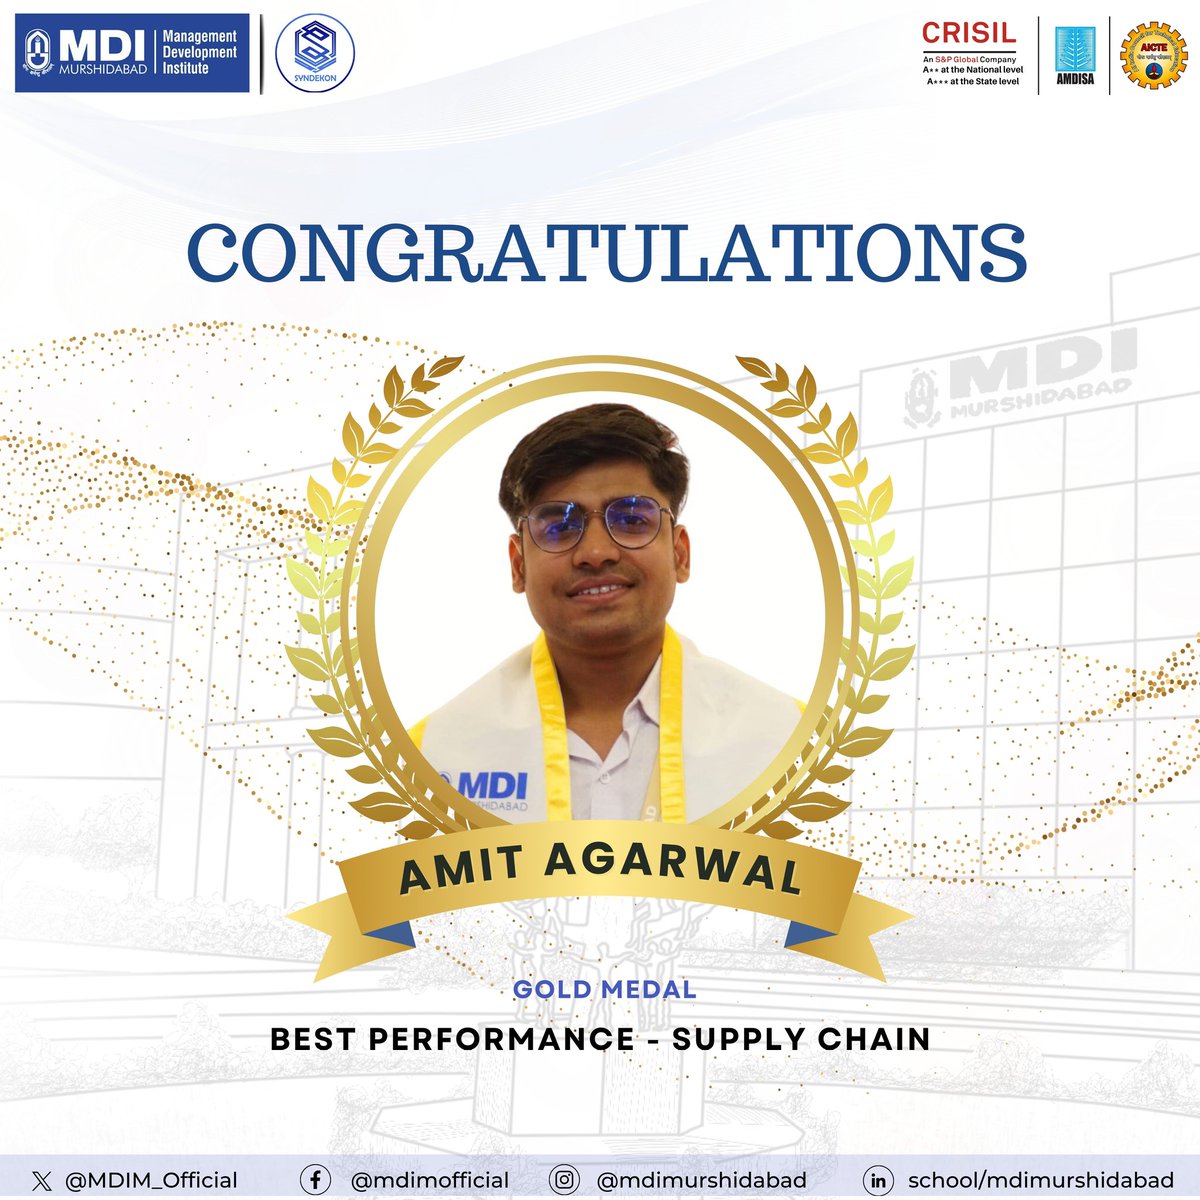 #MDIM proudly honors Mr Amit Agarwal for securing the Gold Medal in #SupplyChain for the PGDM class of 2022-24. Mr Agarwal's exceptional dedication and academic prowess set a high standard within the Supply Chain cohort, showcasing exemplary leadership. #MBA #MDI #Management